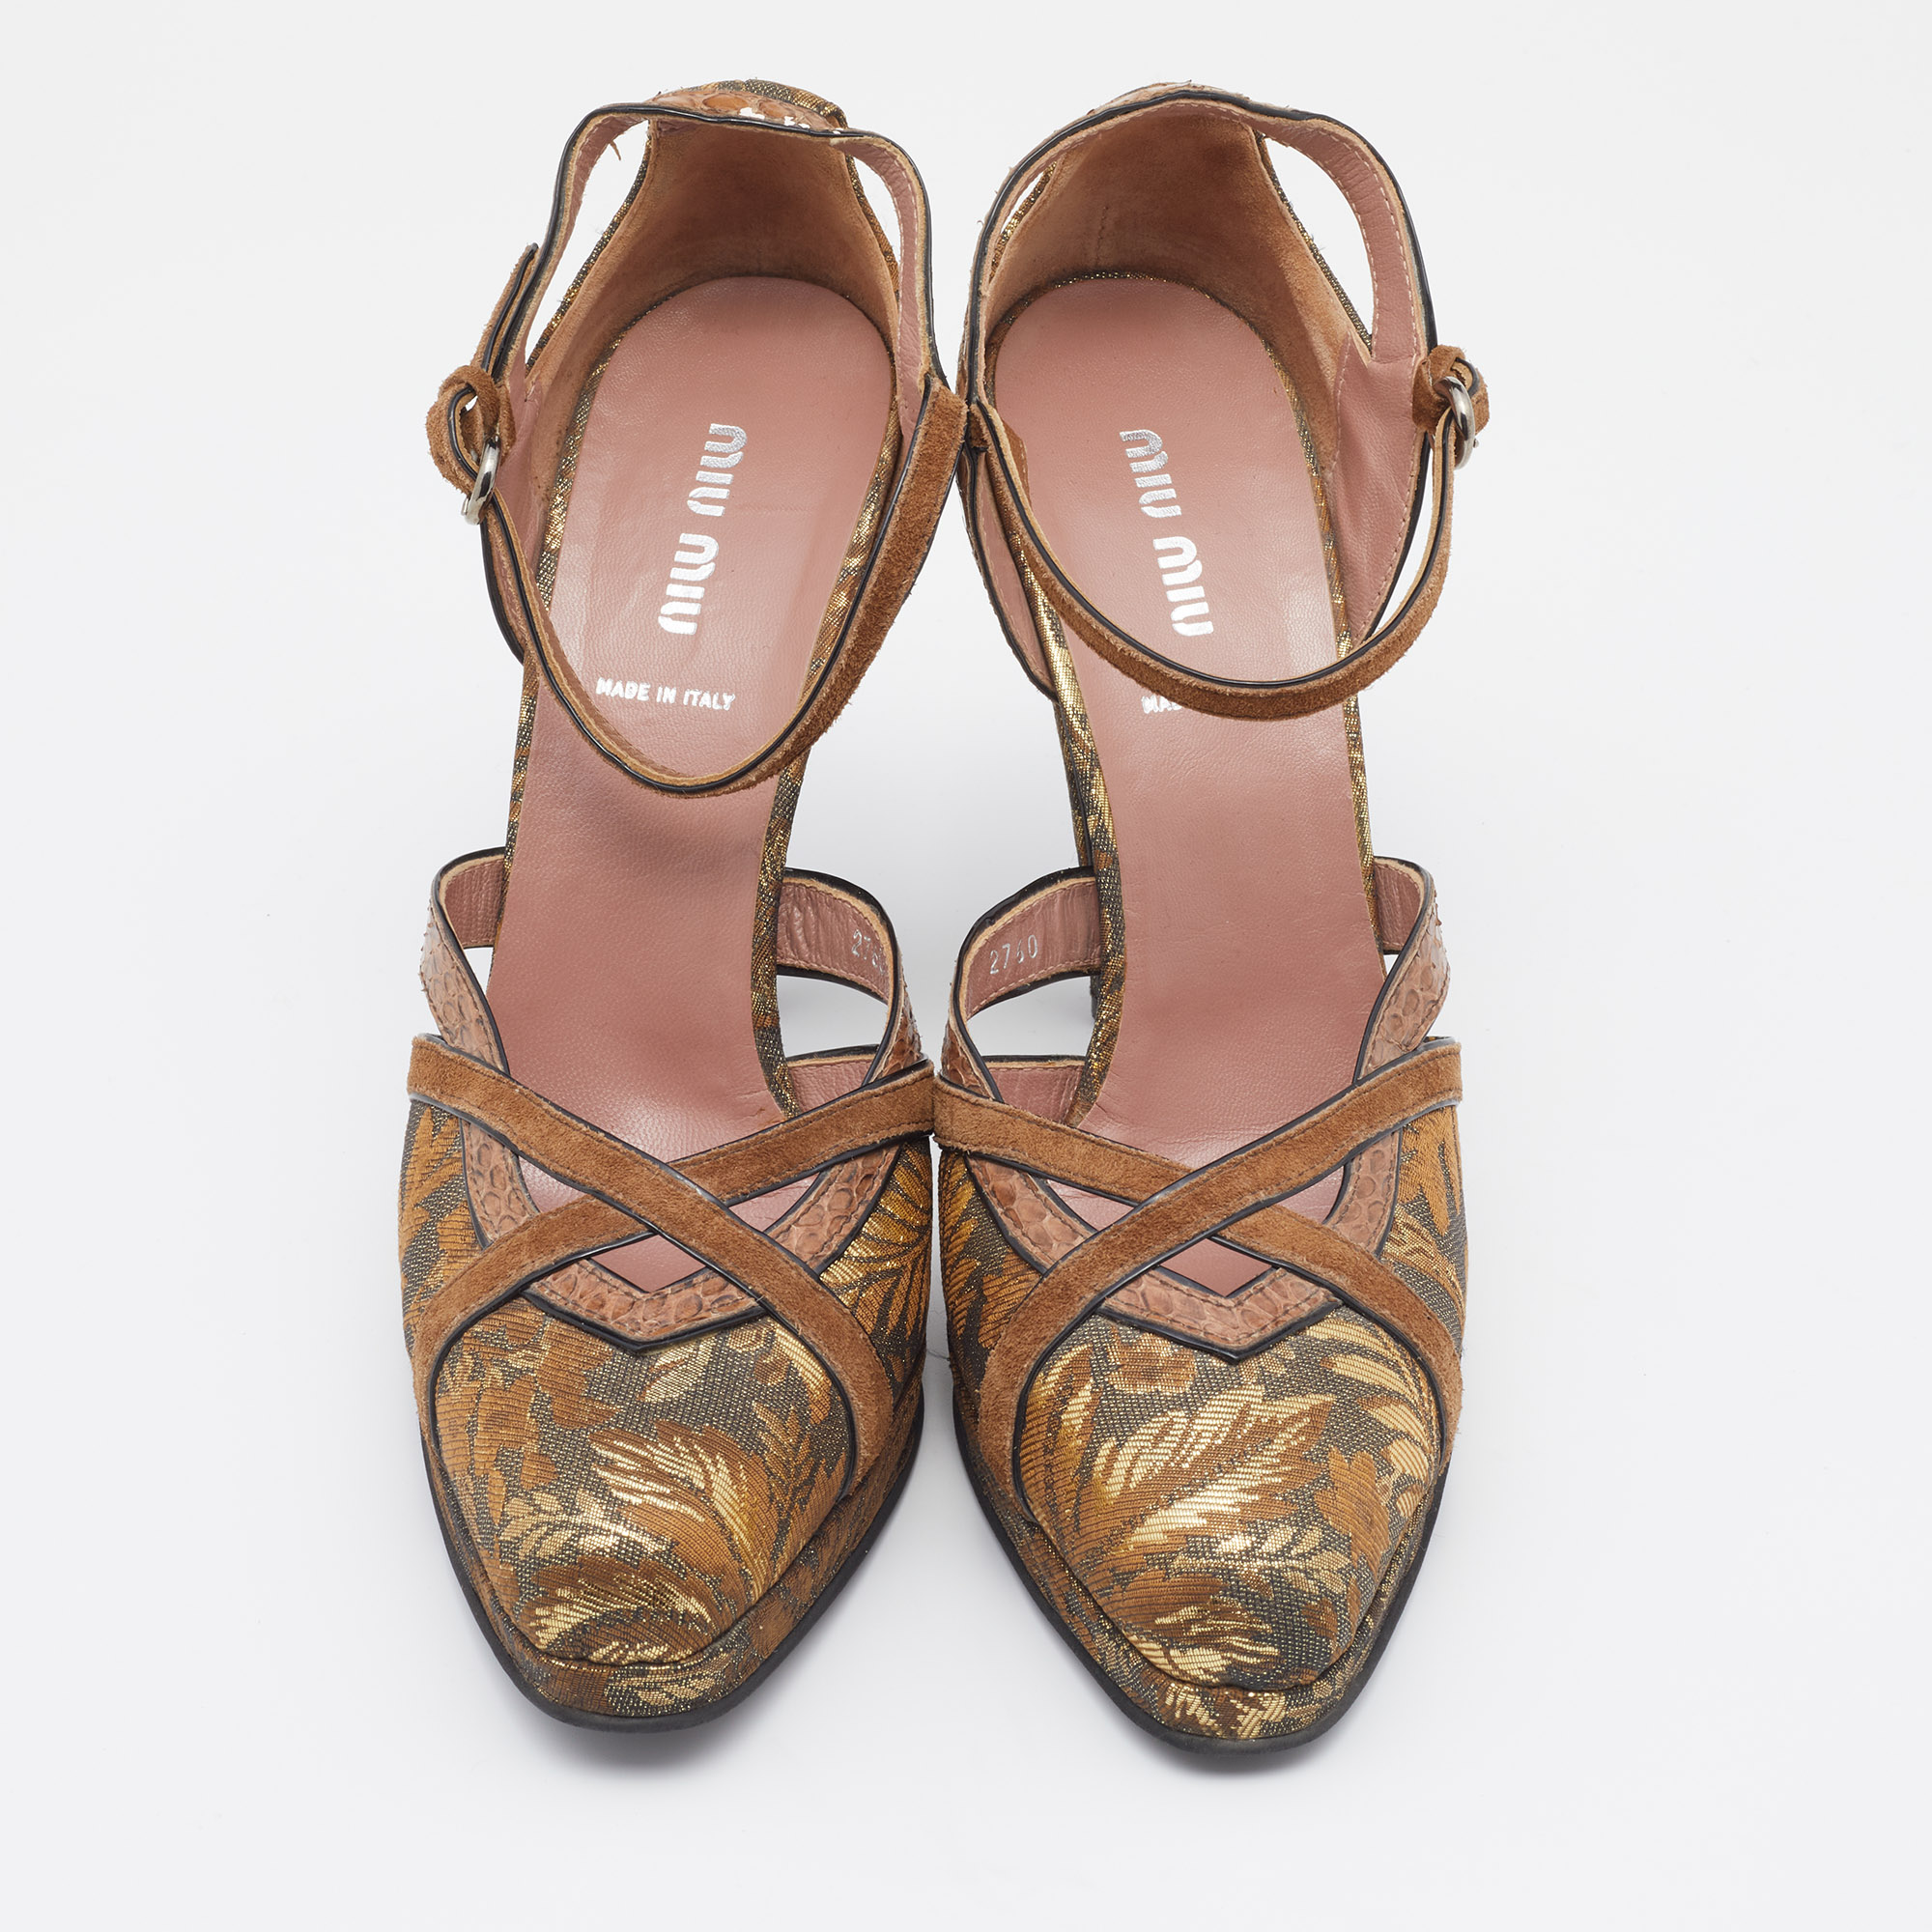 Miu Miu Brown/Gold Brocade Fabric And Python Trim D'orsay Ankle Strap Pumps Size 40